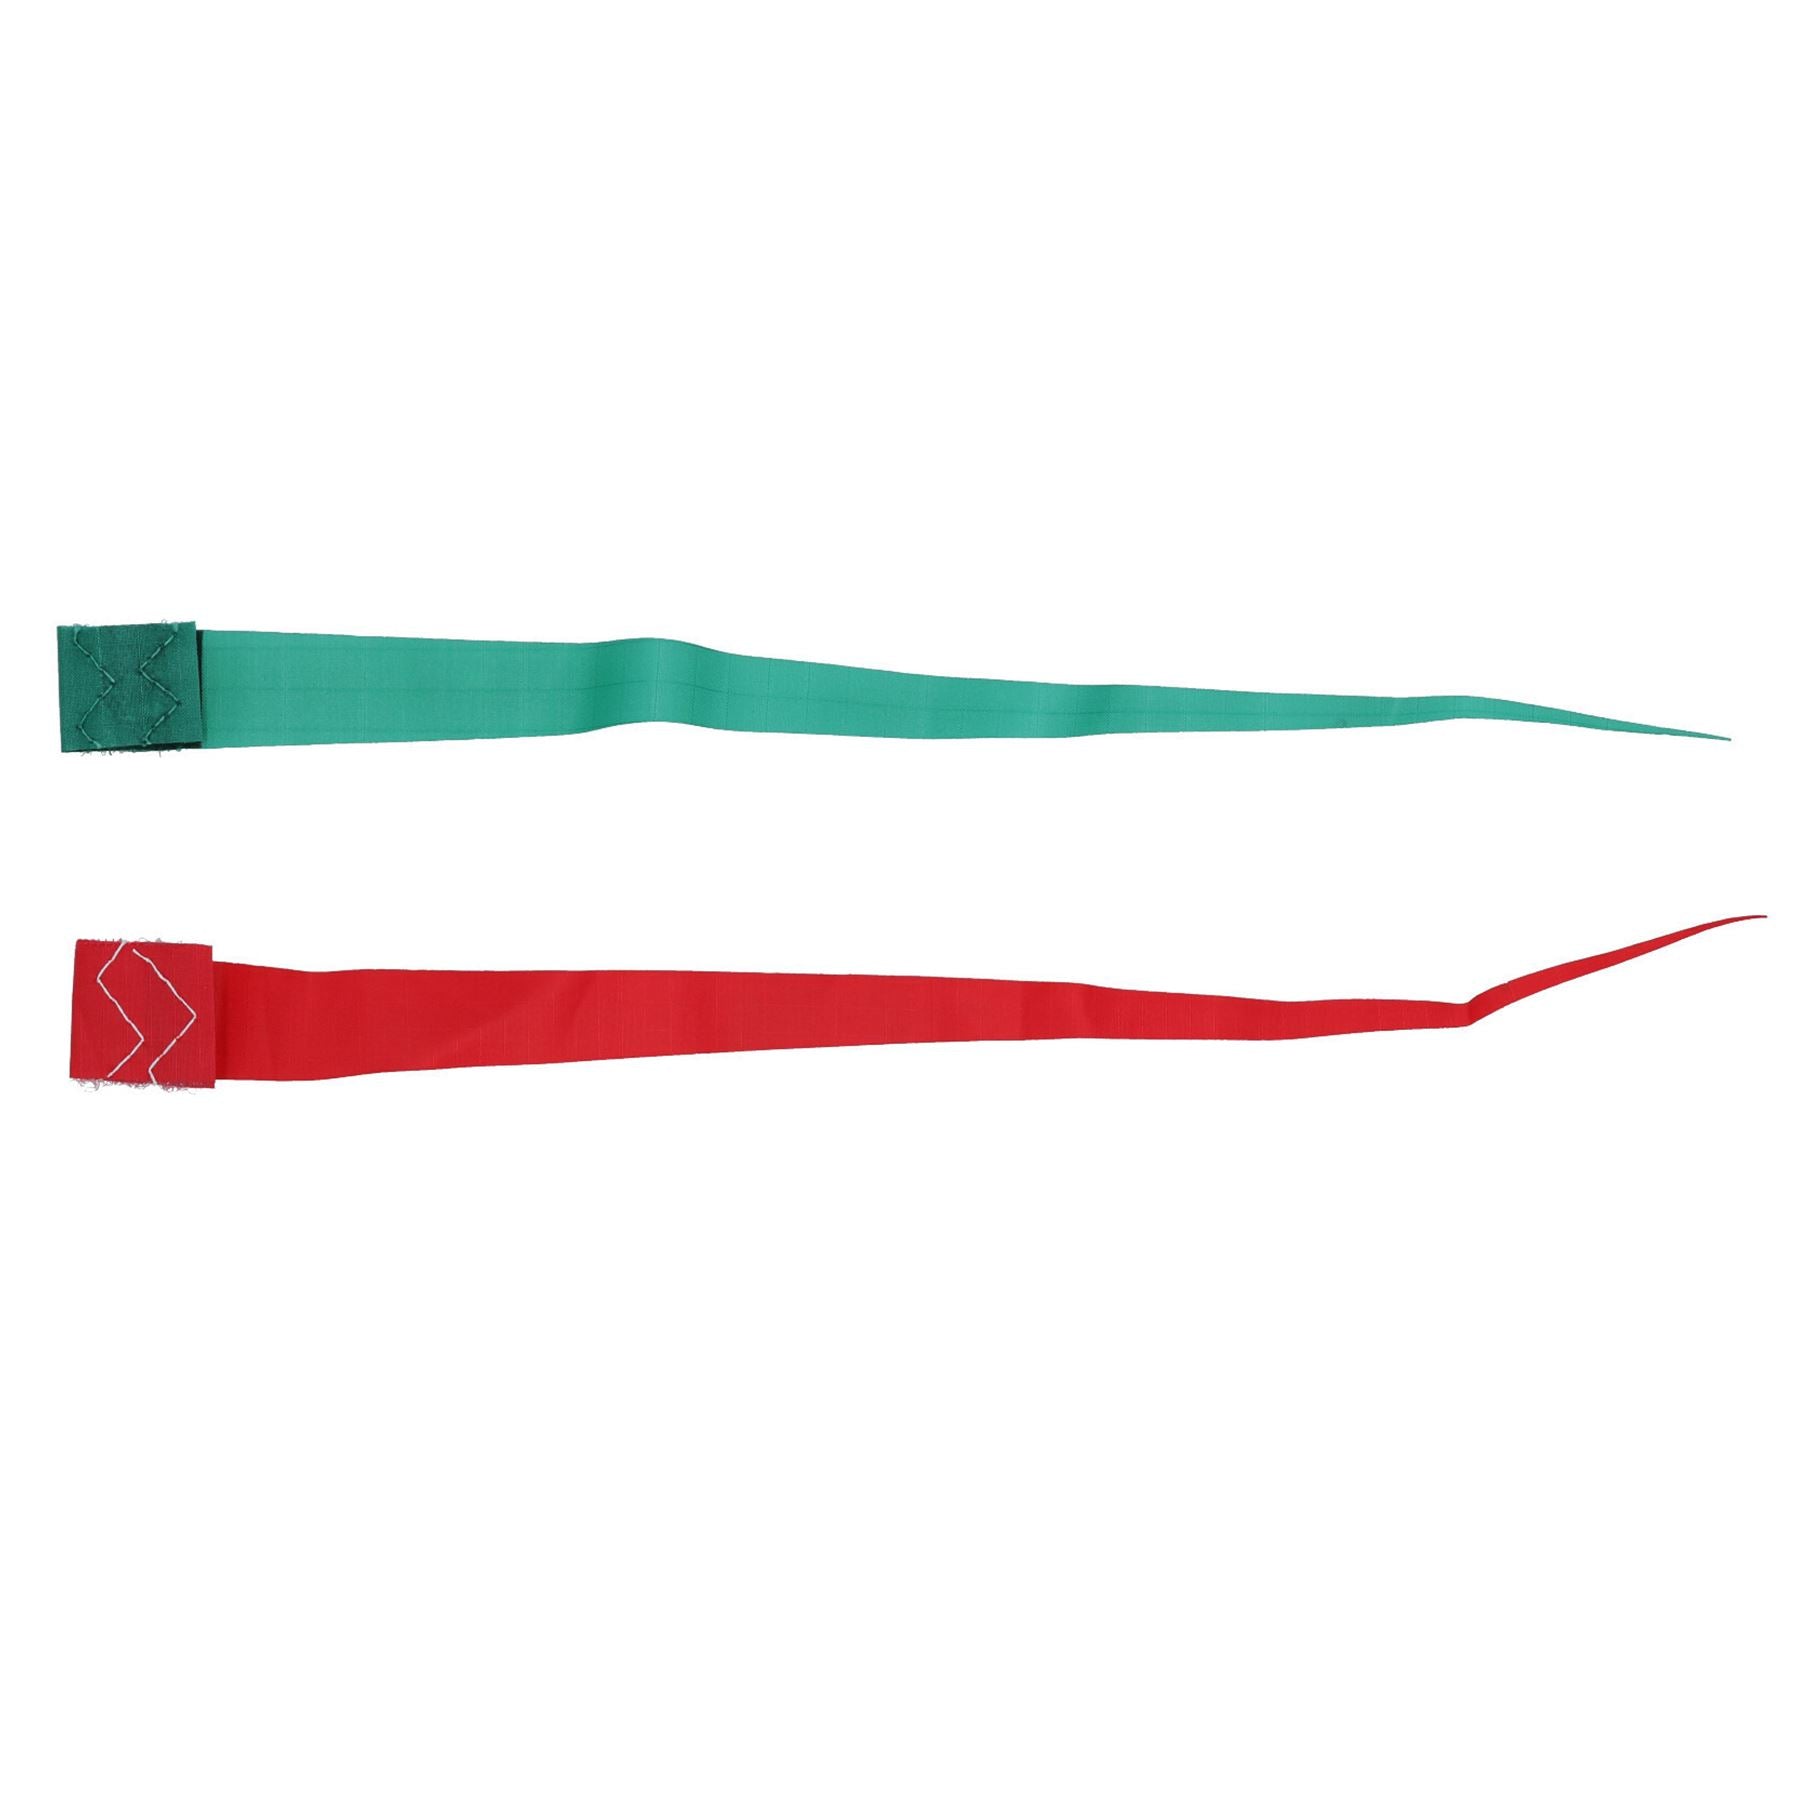 31cm Shroud Sail Tell Tales Red & Green Wind Indicator Dinghy Yacht Sailing